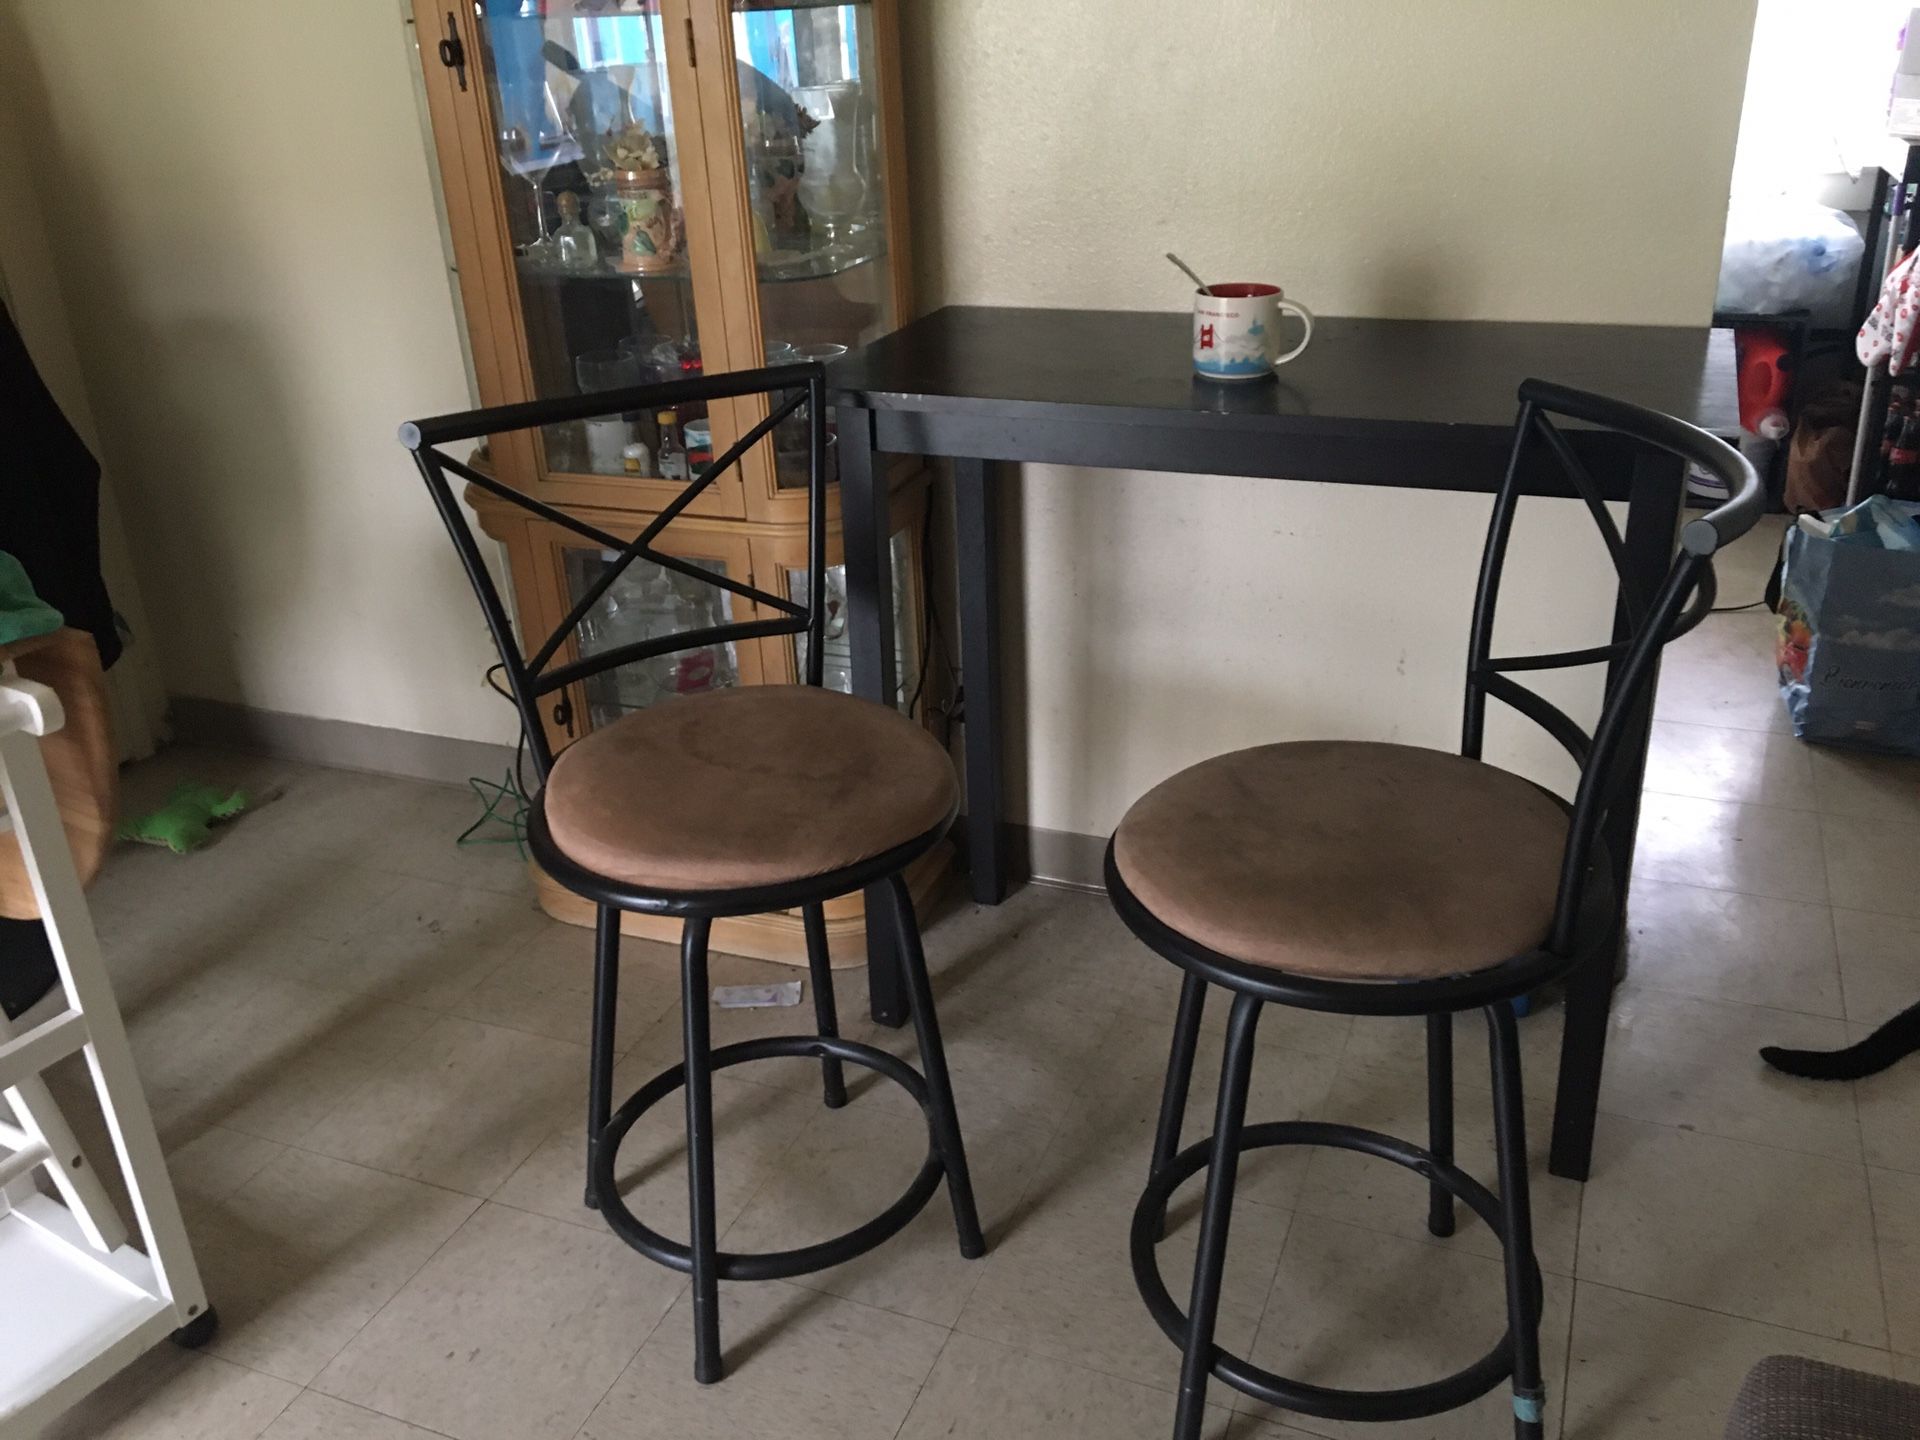 Small table and stools